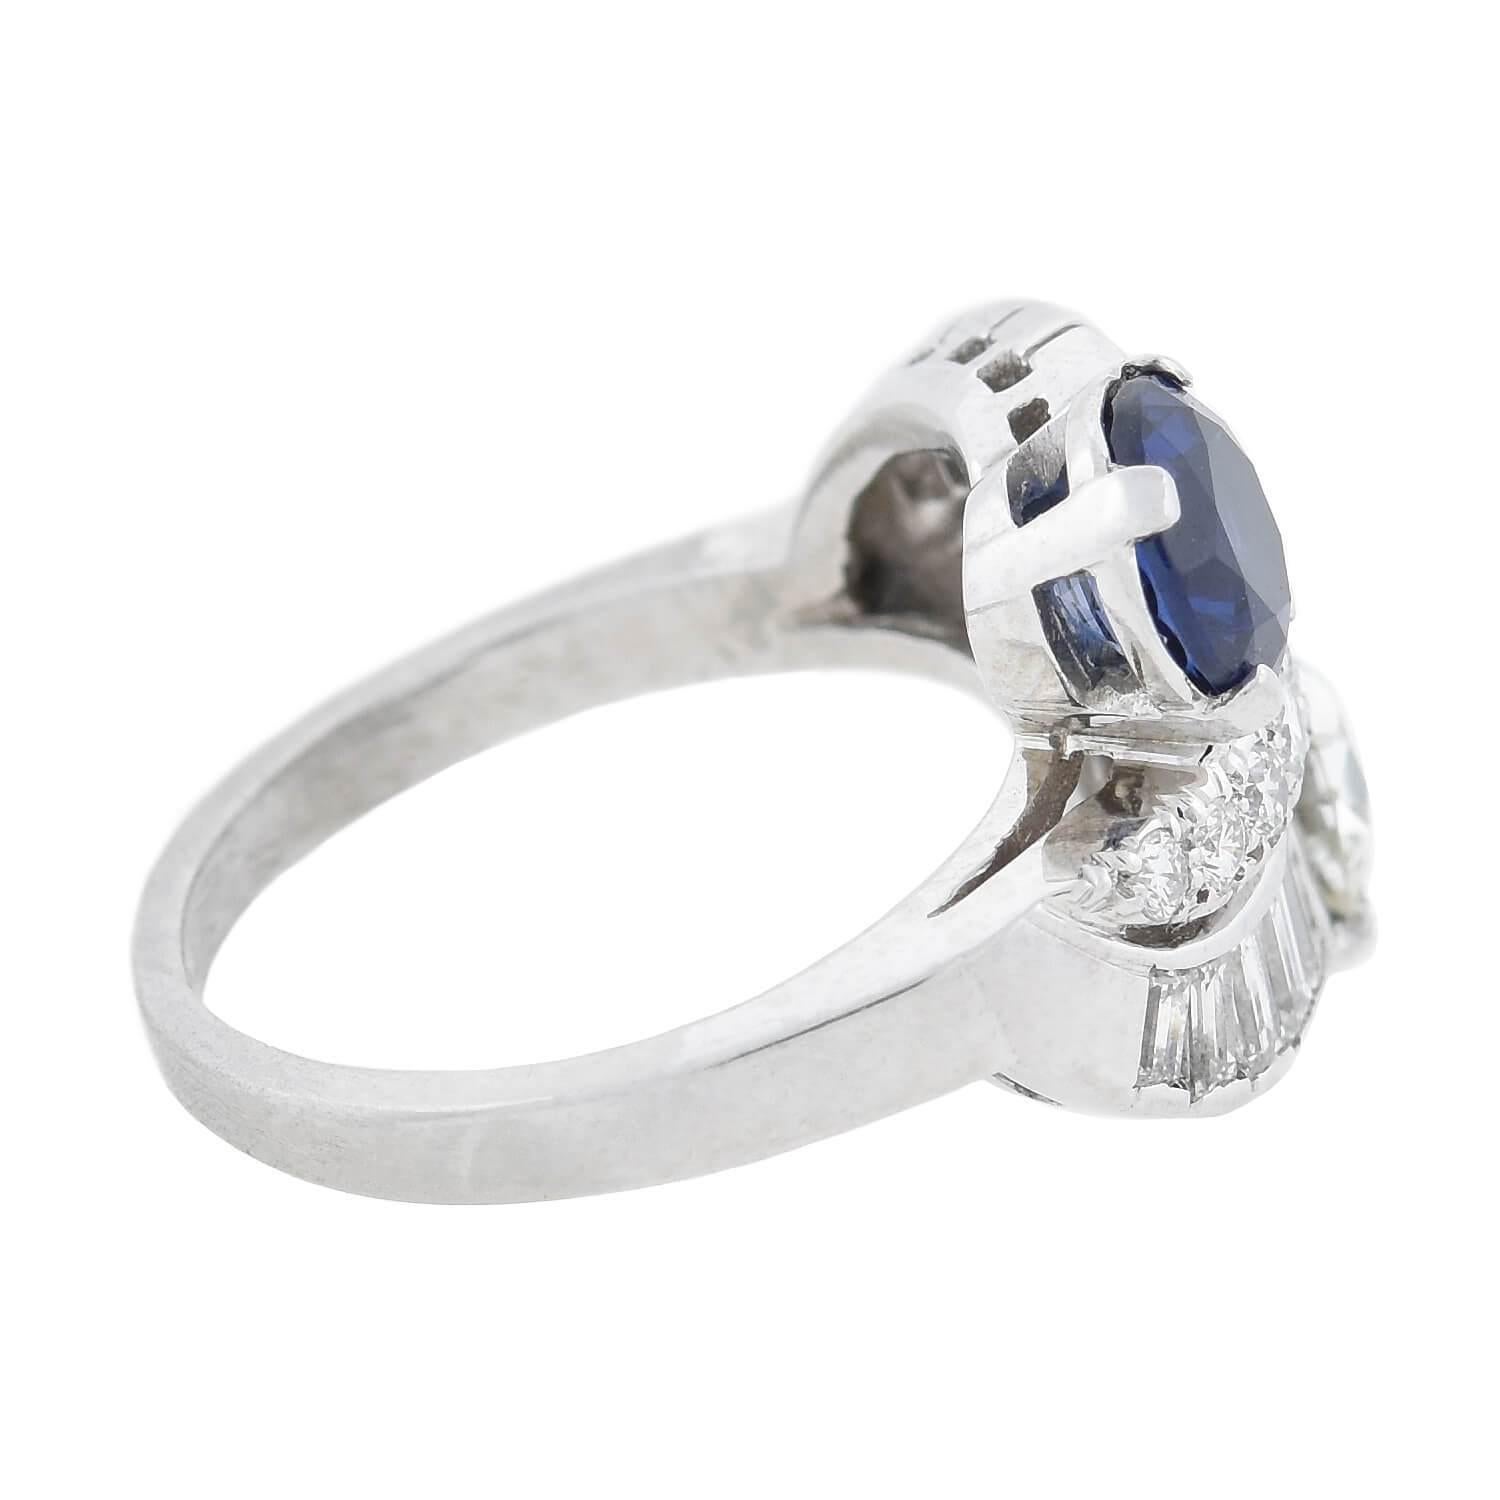 A spectacular late Art Deco (ca1930s) era diamond and sapphire ring from C. D. Peacock, an acclaimed Chicago jeweler. Crafted in platinum, this fabulous piece boasts a wonderful symmetrical bypass design adorned with brilliant gemstones. A